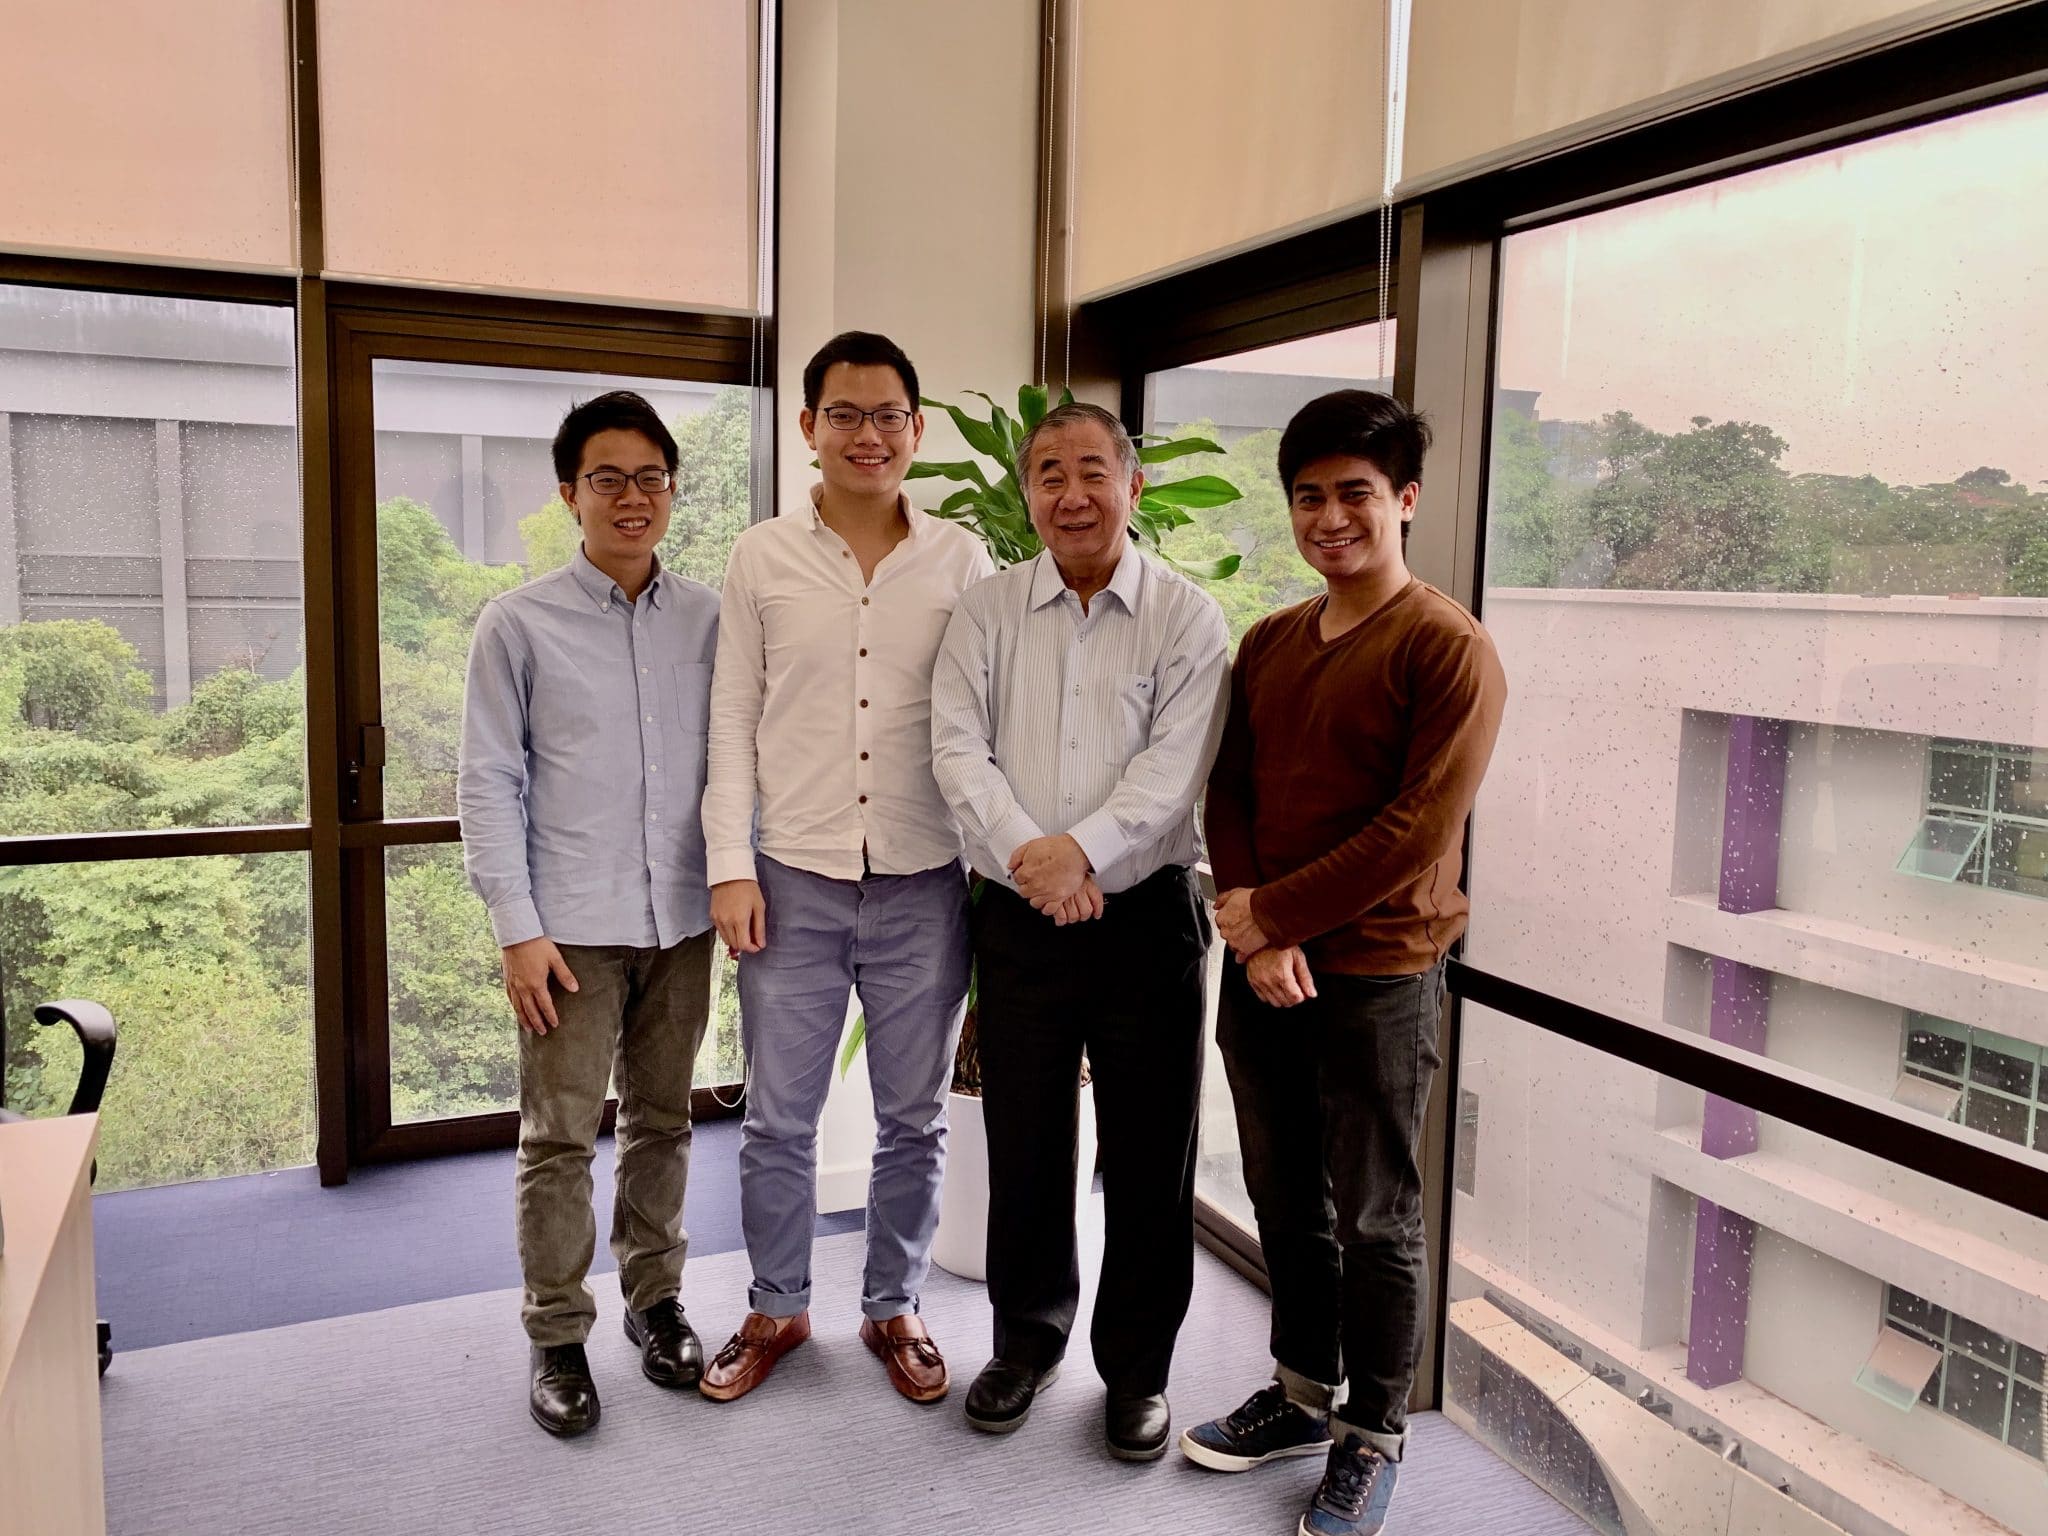 Samuel's (right) goals had initially been to “work in a bank and retire rich”. But learning about the idea of Kingdom assignments made him start “thinking bigger”. He is pictured here with (from left to right) xx, his mentor Galven Lee and Georgie Lee, National President of Gatekeepers Singapore. Photo courtesy of Samuel Tan.